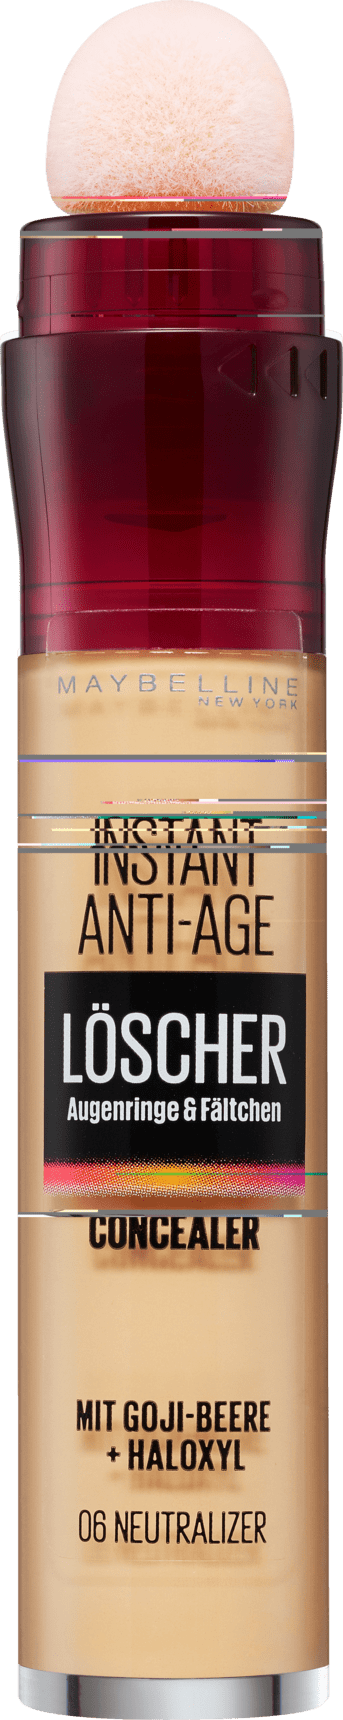 Maybelline Concealer Instant Anti-Age The Extinguisher 06, 6.8 Ml